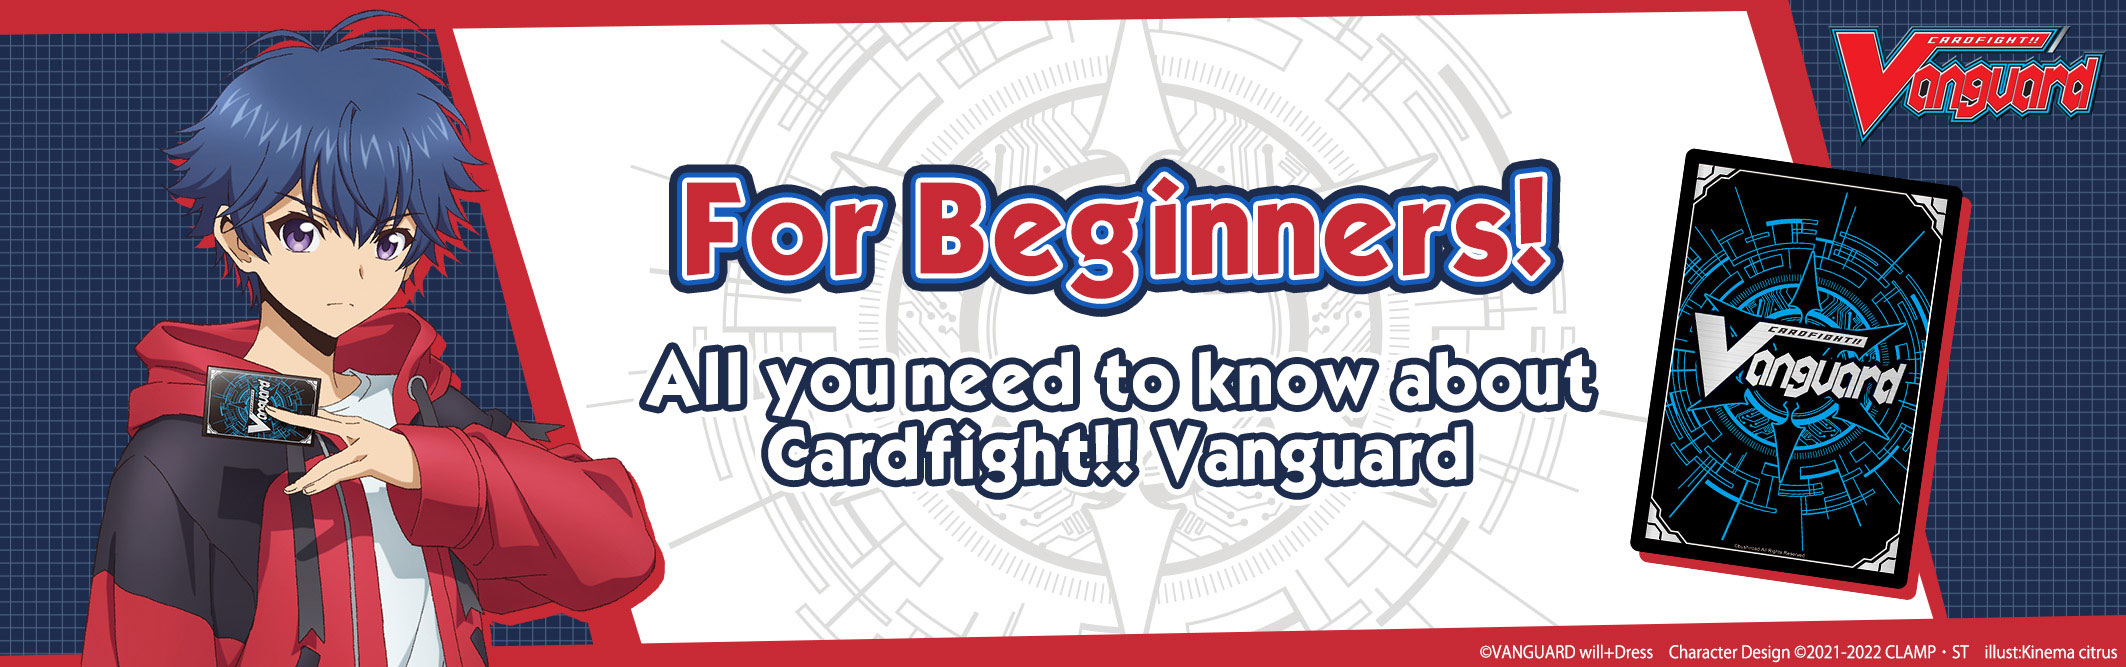 about-cardfight-vanguard-cardfight-vanguard-trading-card-game-official-website